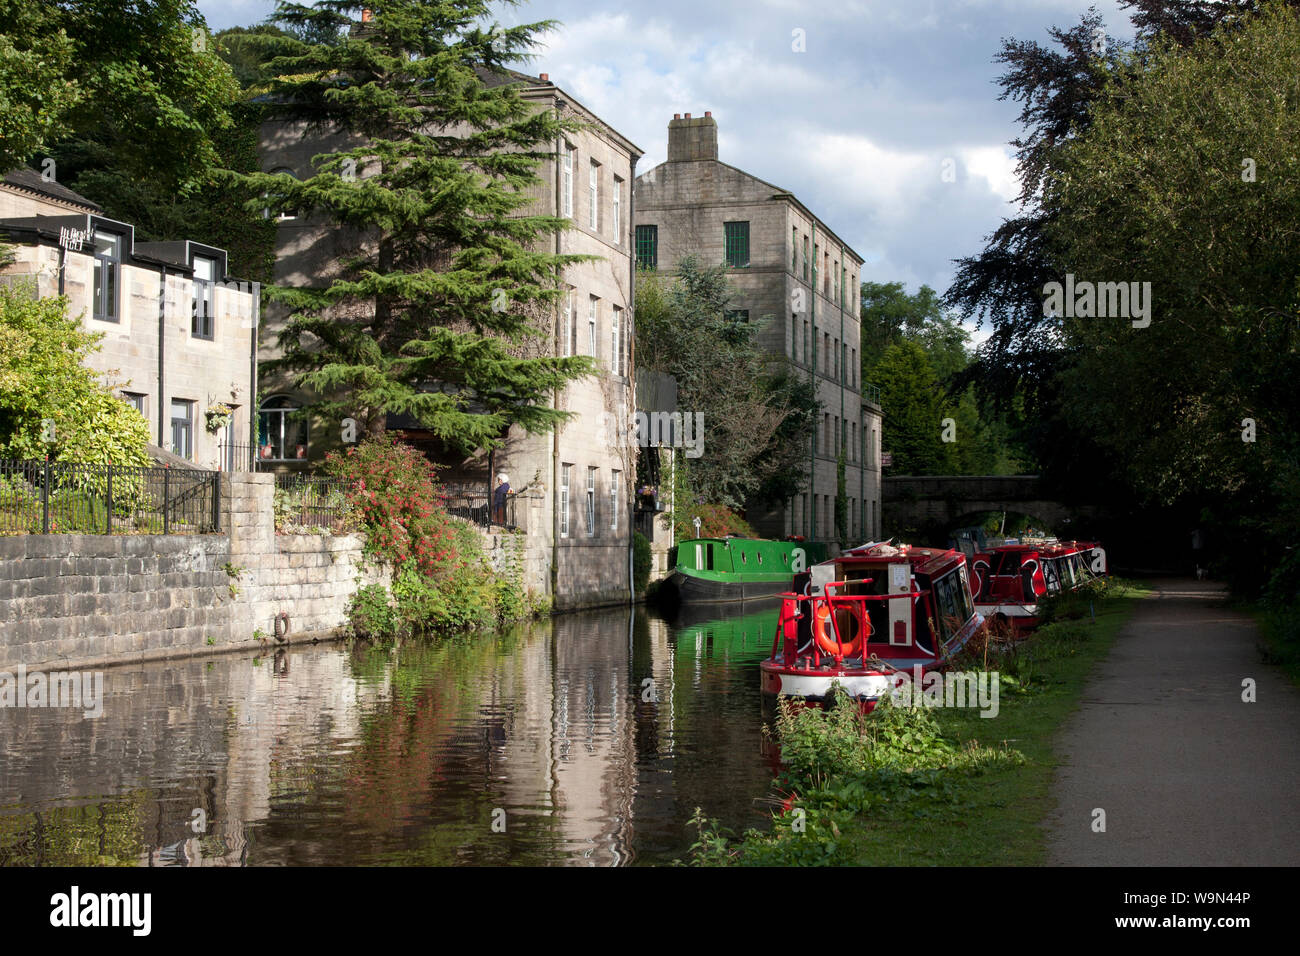 Narrowboats in Rochdale Canal a Hebden Bridge, Superiore Calder Valley, West Yorkshire Foto Stock